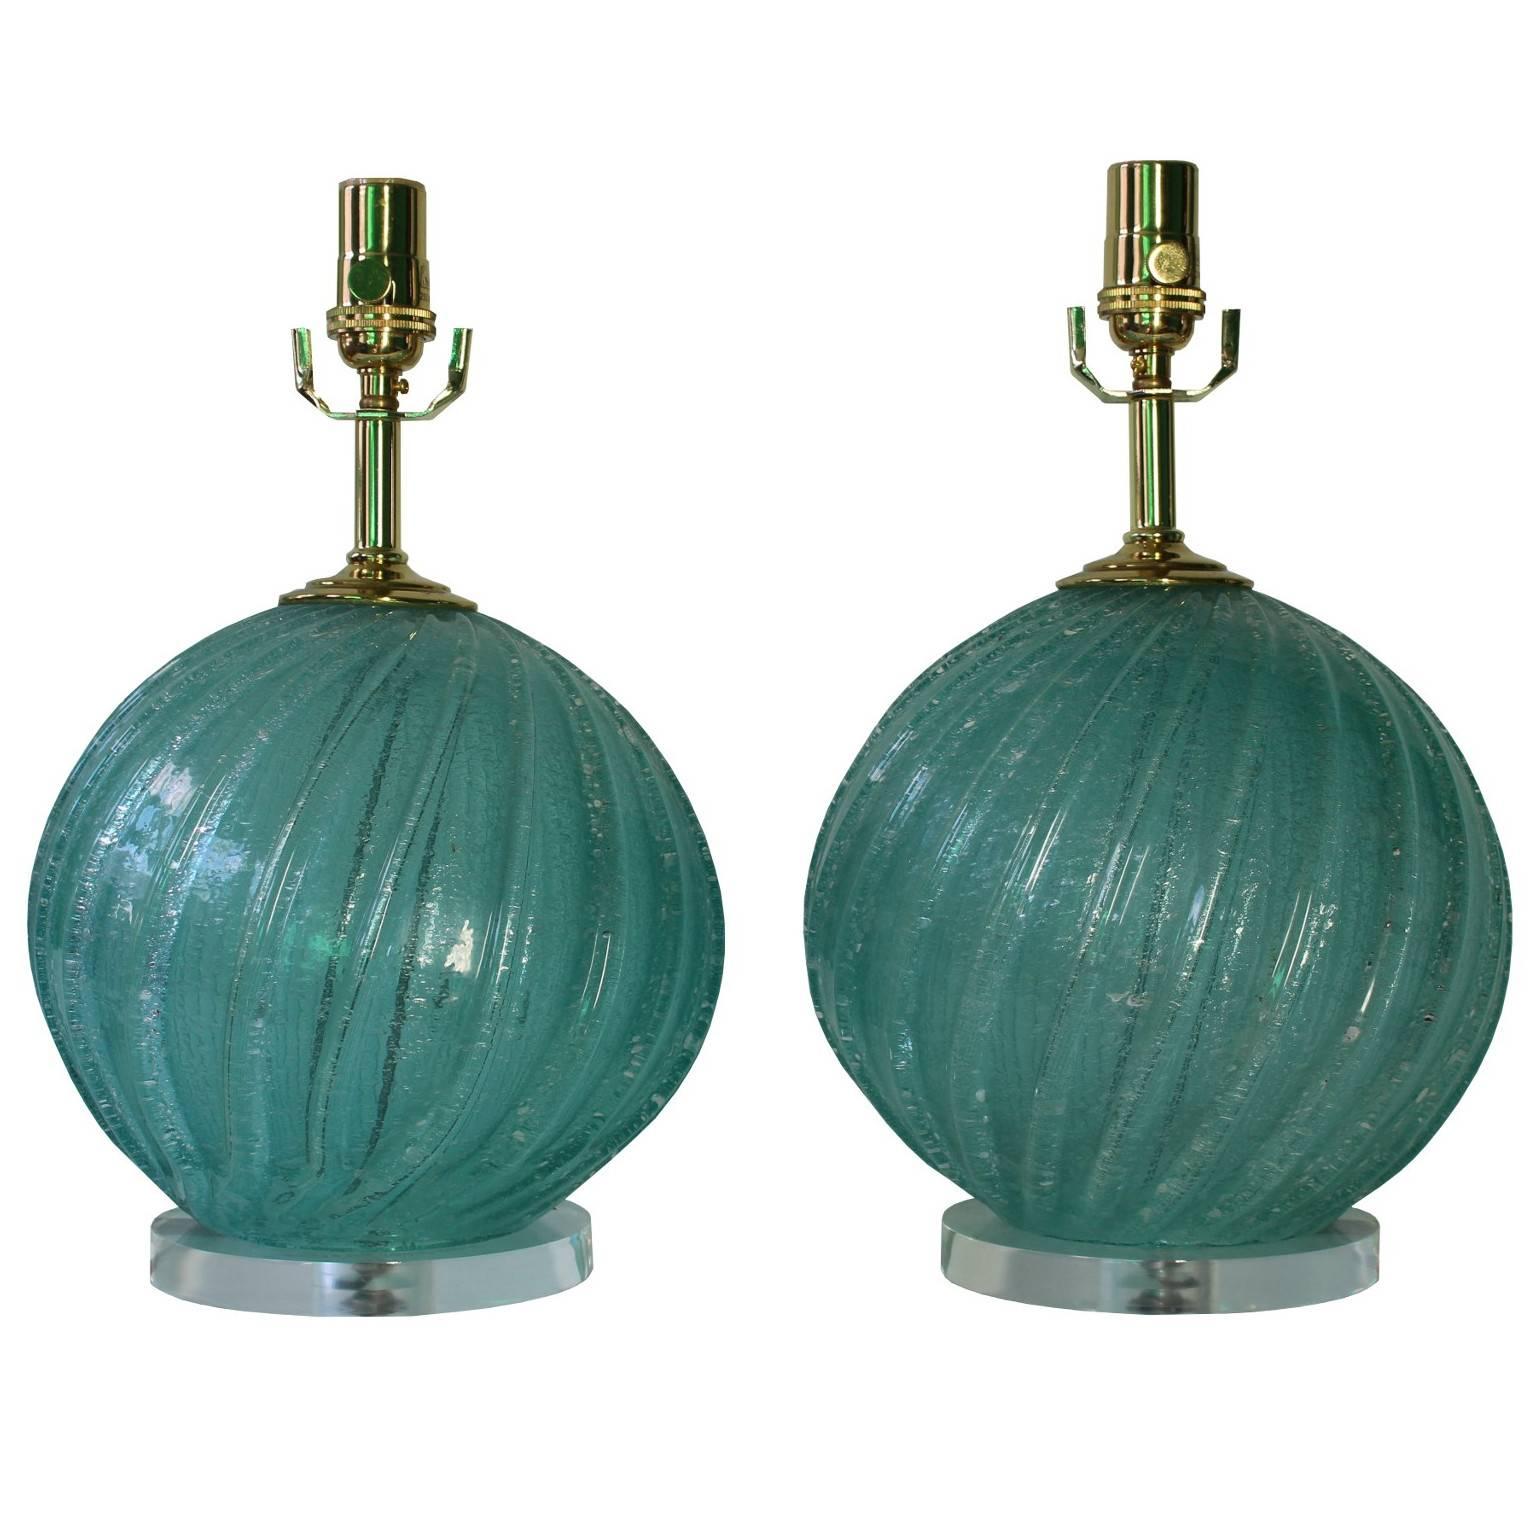 Pair of Aquamarine Murano Glass Ball Lamps on Lucite Bases